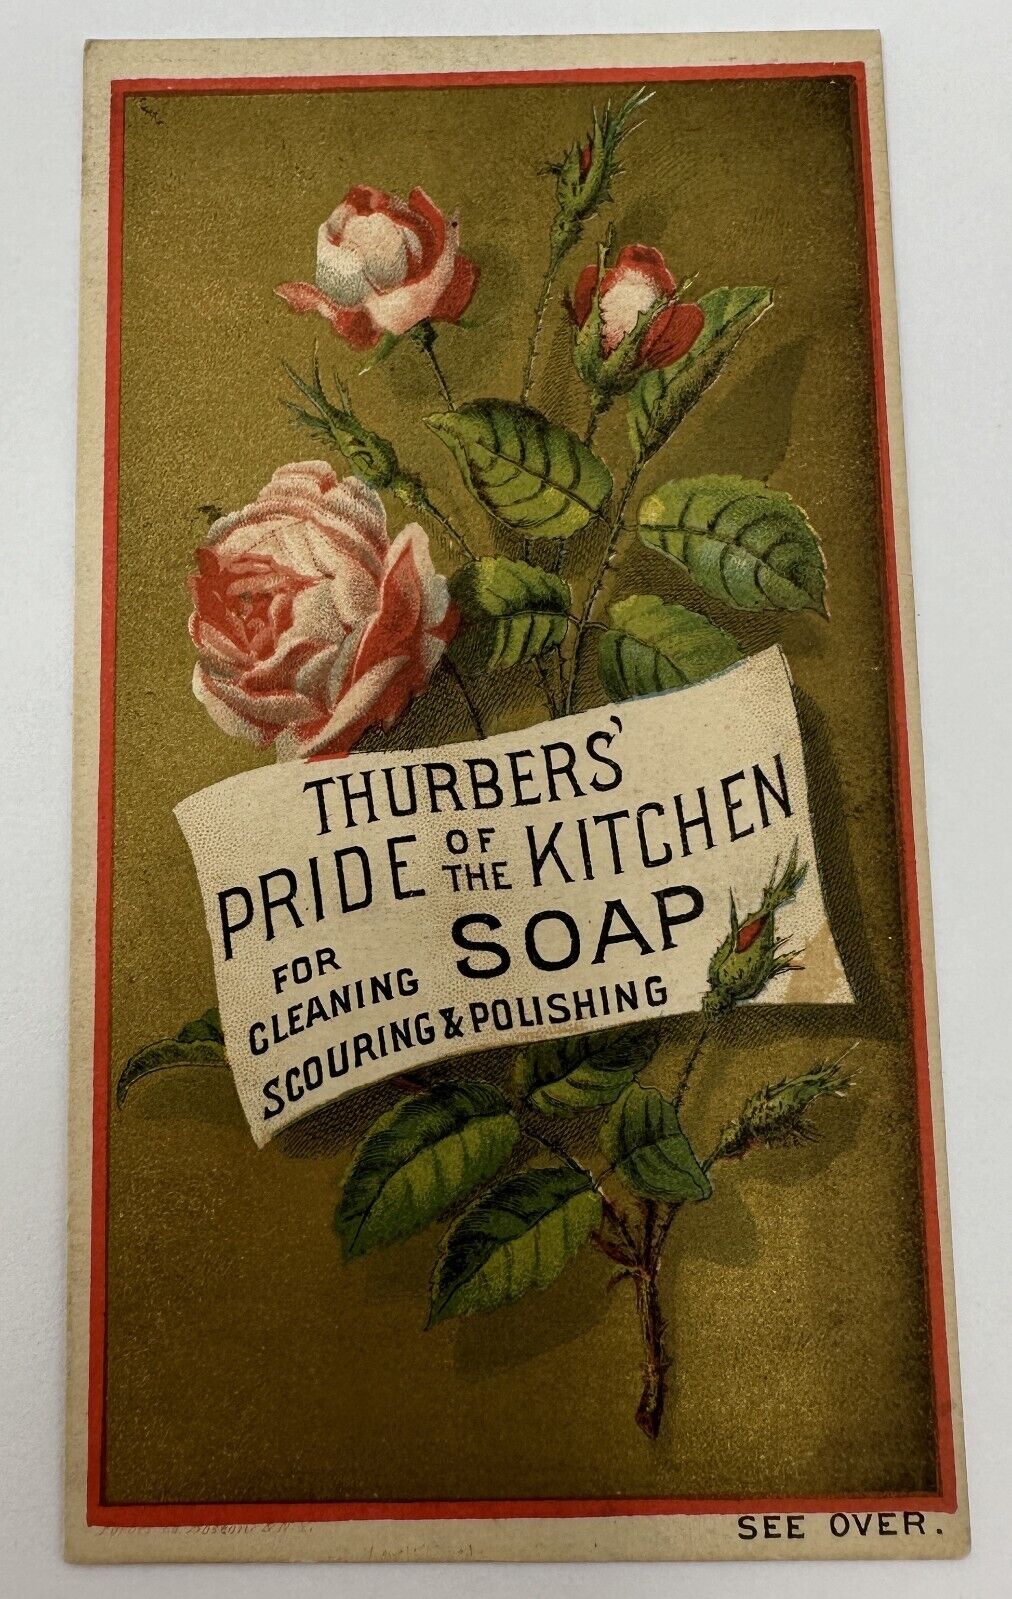 VTG Thurbers Pride Of The Kitchen Soap Cleaning Scouring Victorian Trade Card